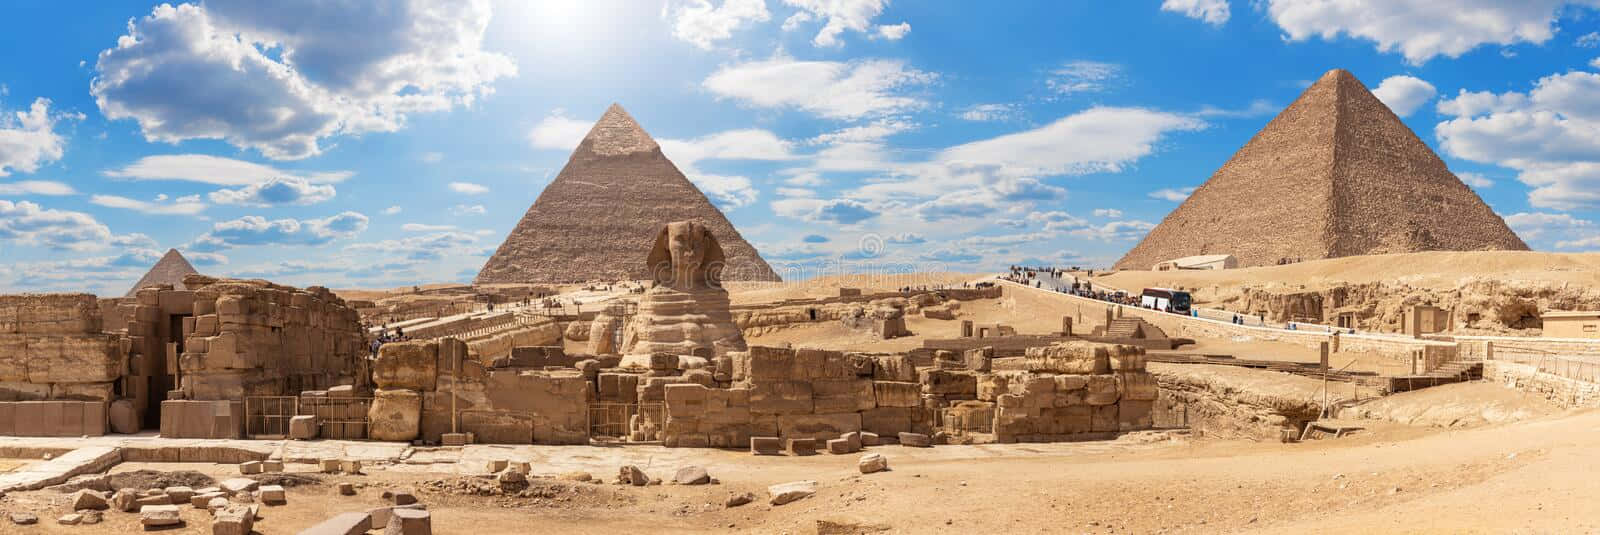 Awe-Inspiring View of the Great Sphinx and Majestic Pyramids of Giza Wallpaper